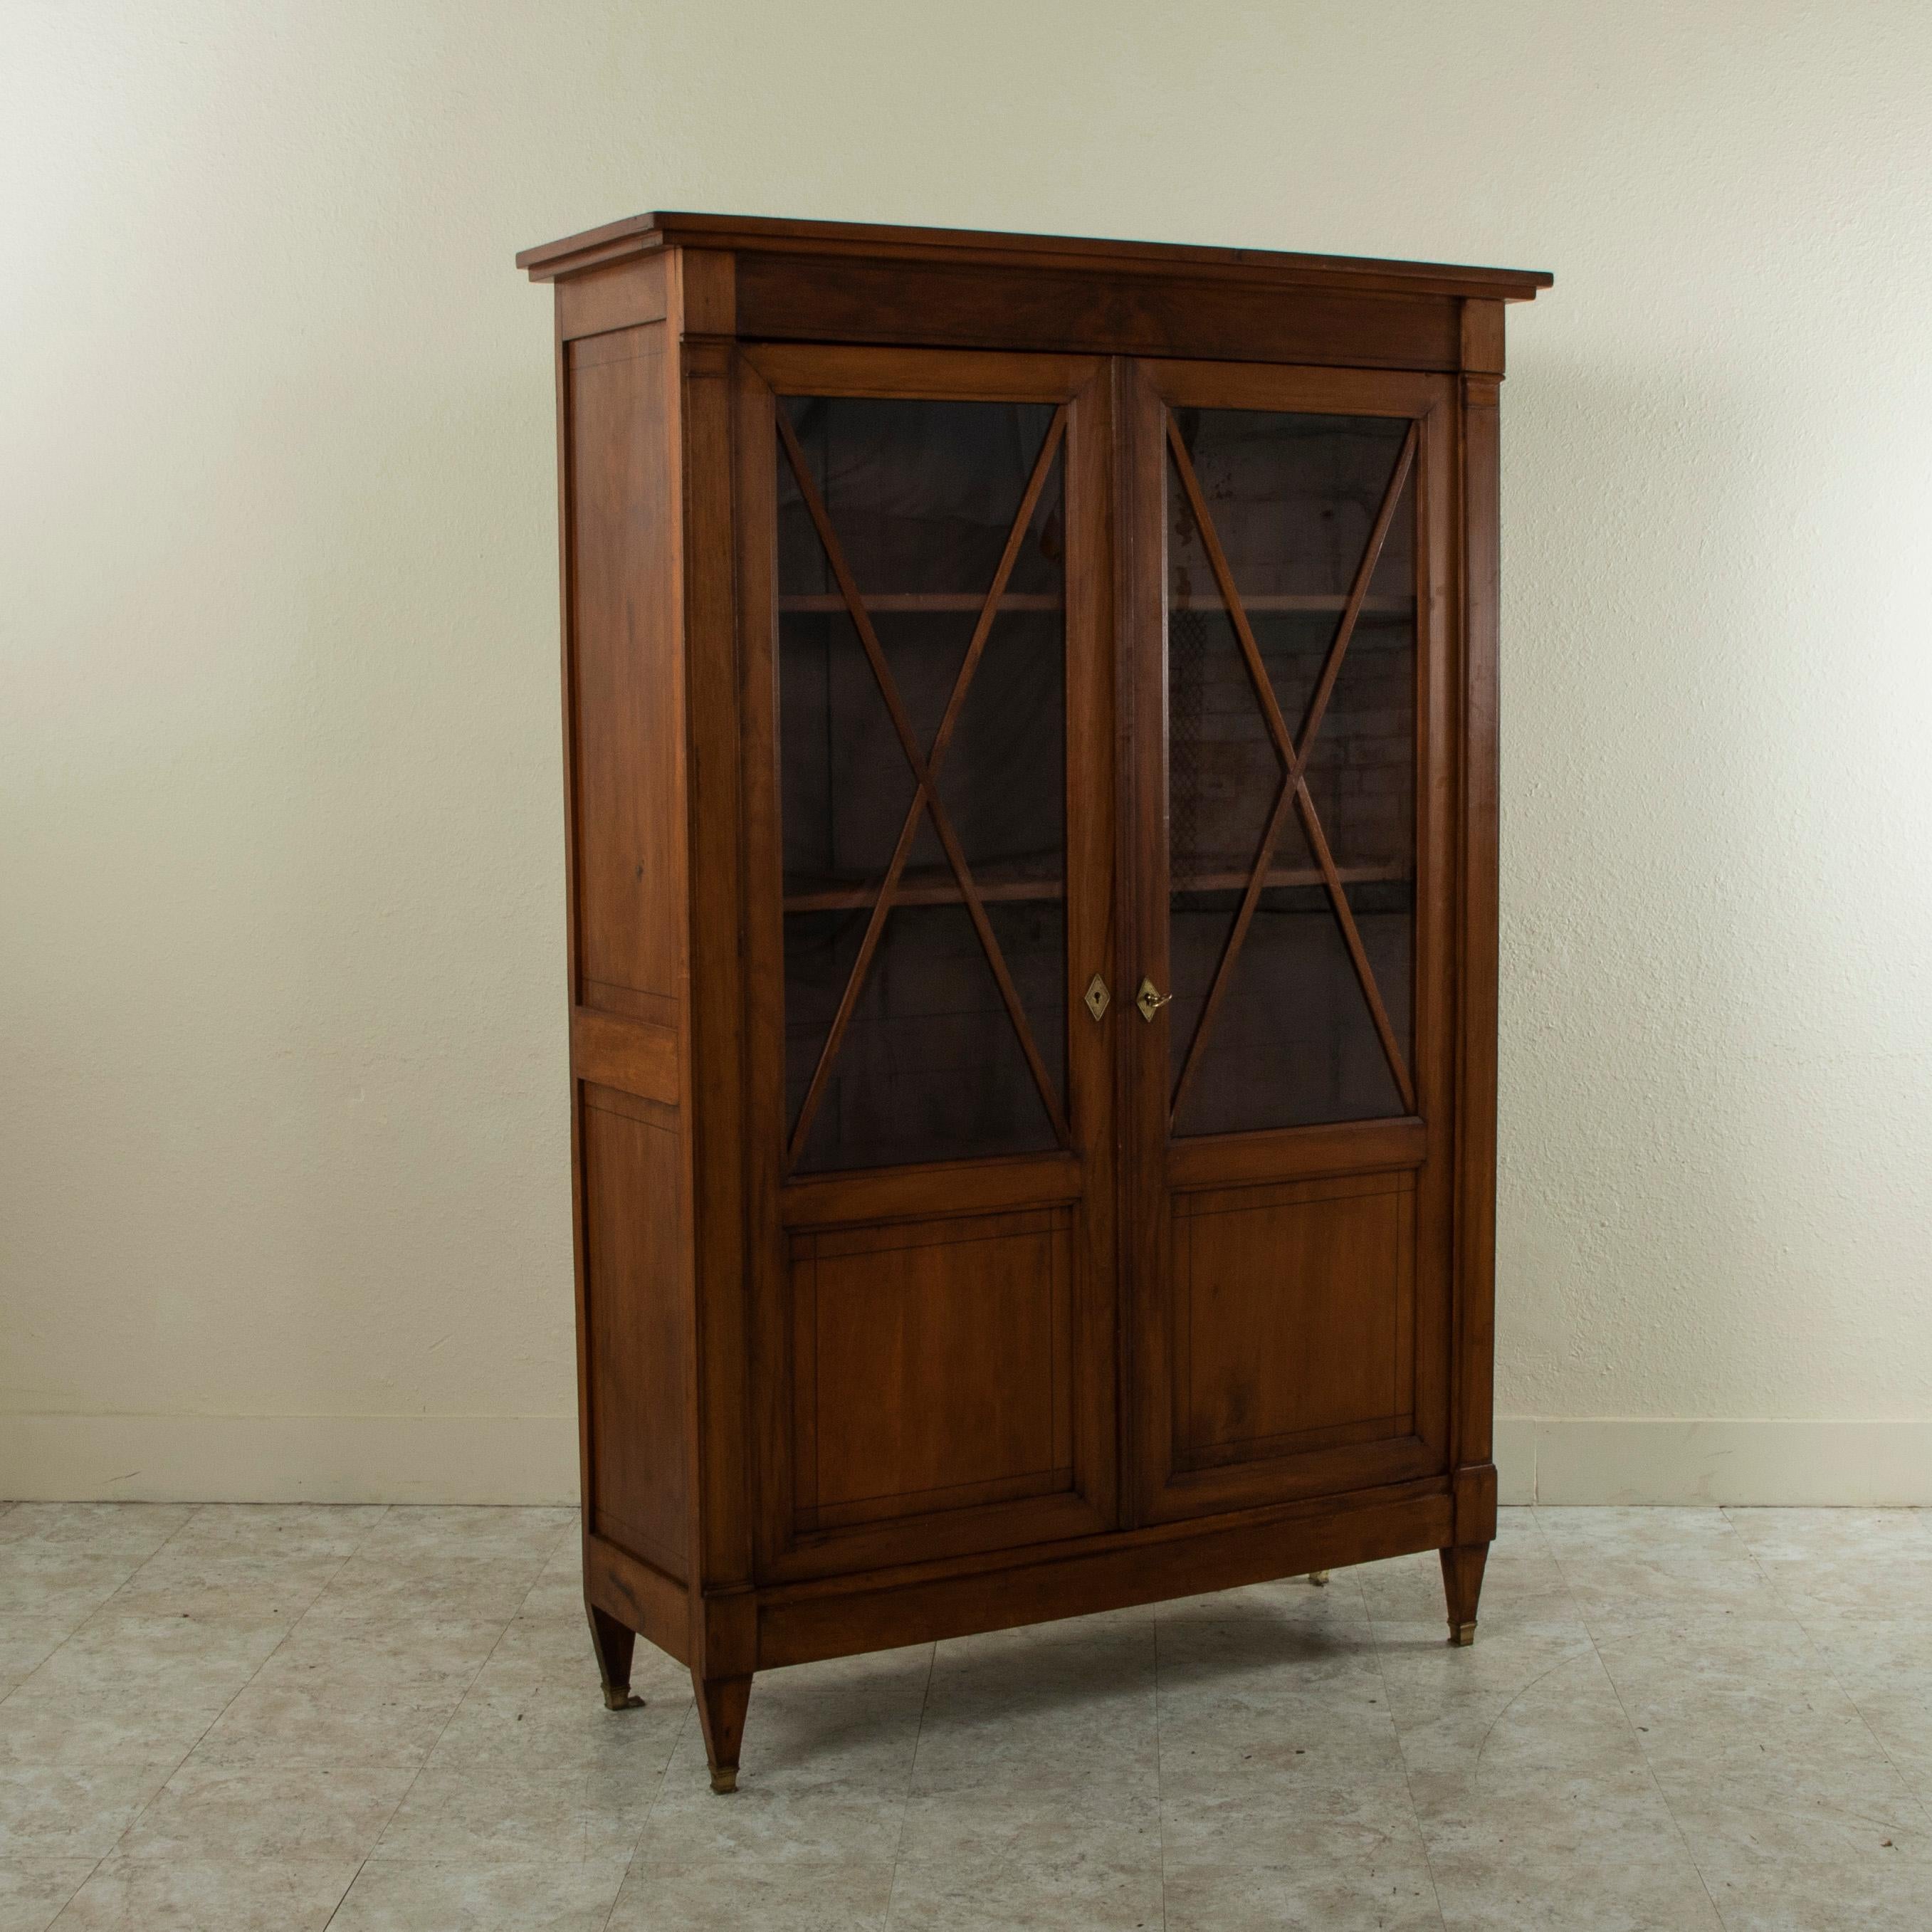 This late nineteenth century French Directoire style bibliotheque or bookcase is constructed of solid walnut and rests on tapered square legs fitted with bronze sabots. Its two glass doors feature crossed lines of walnut over the glass. The doors